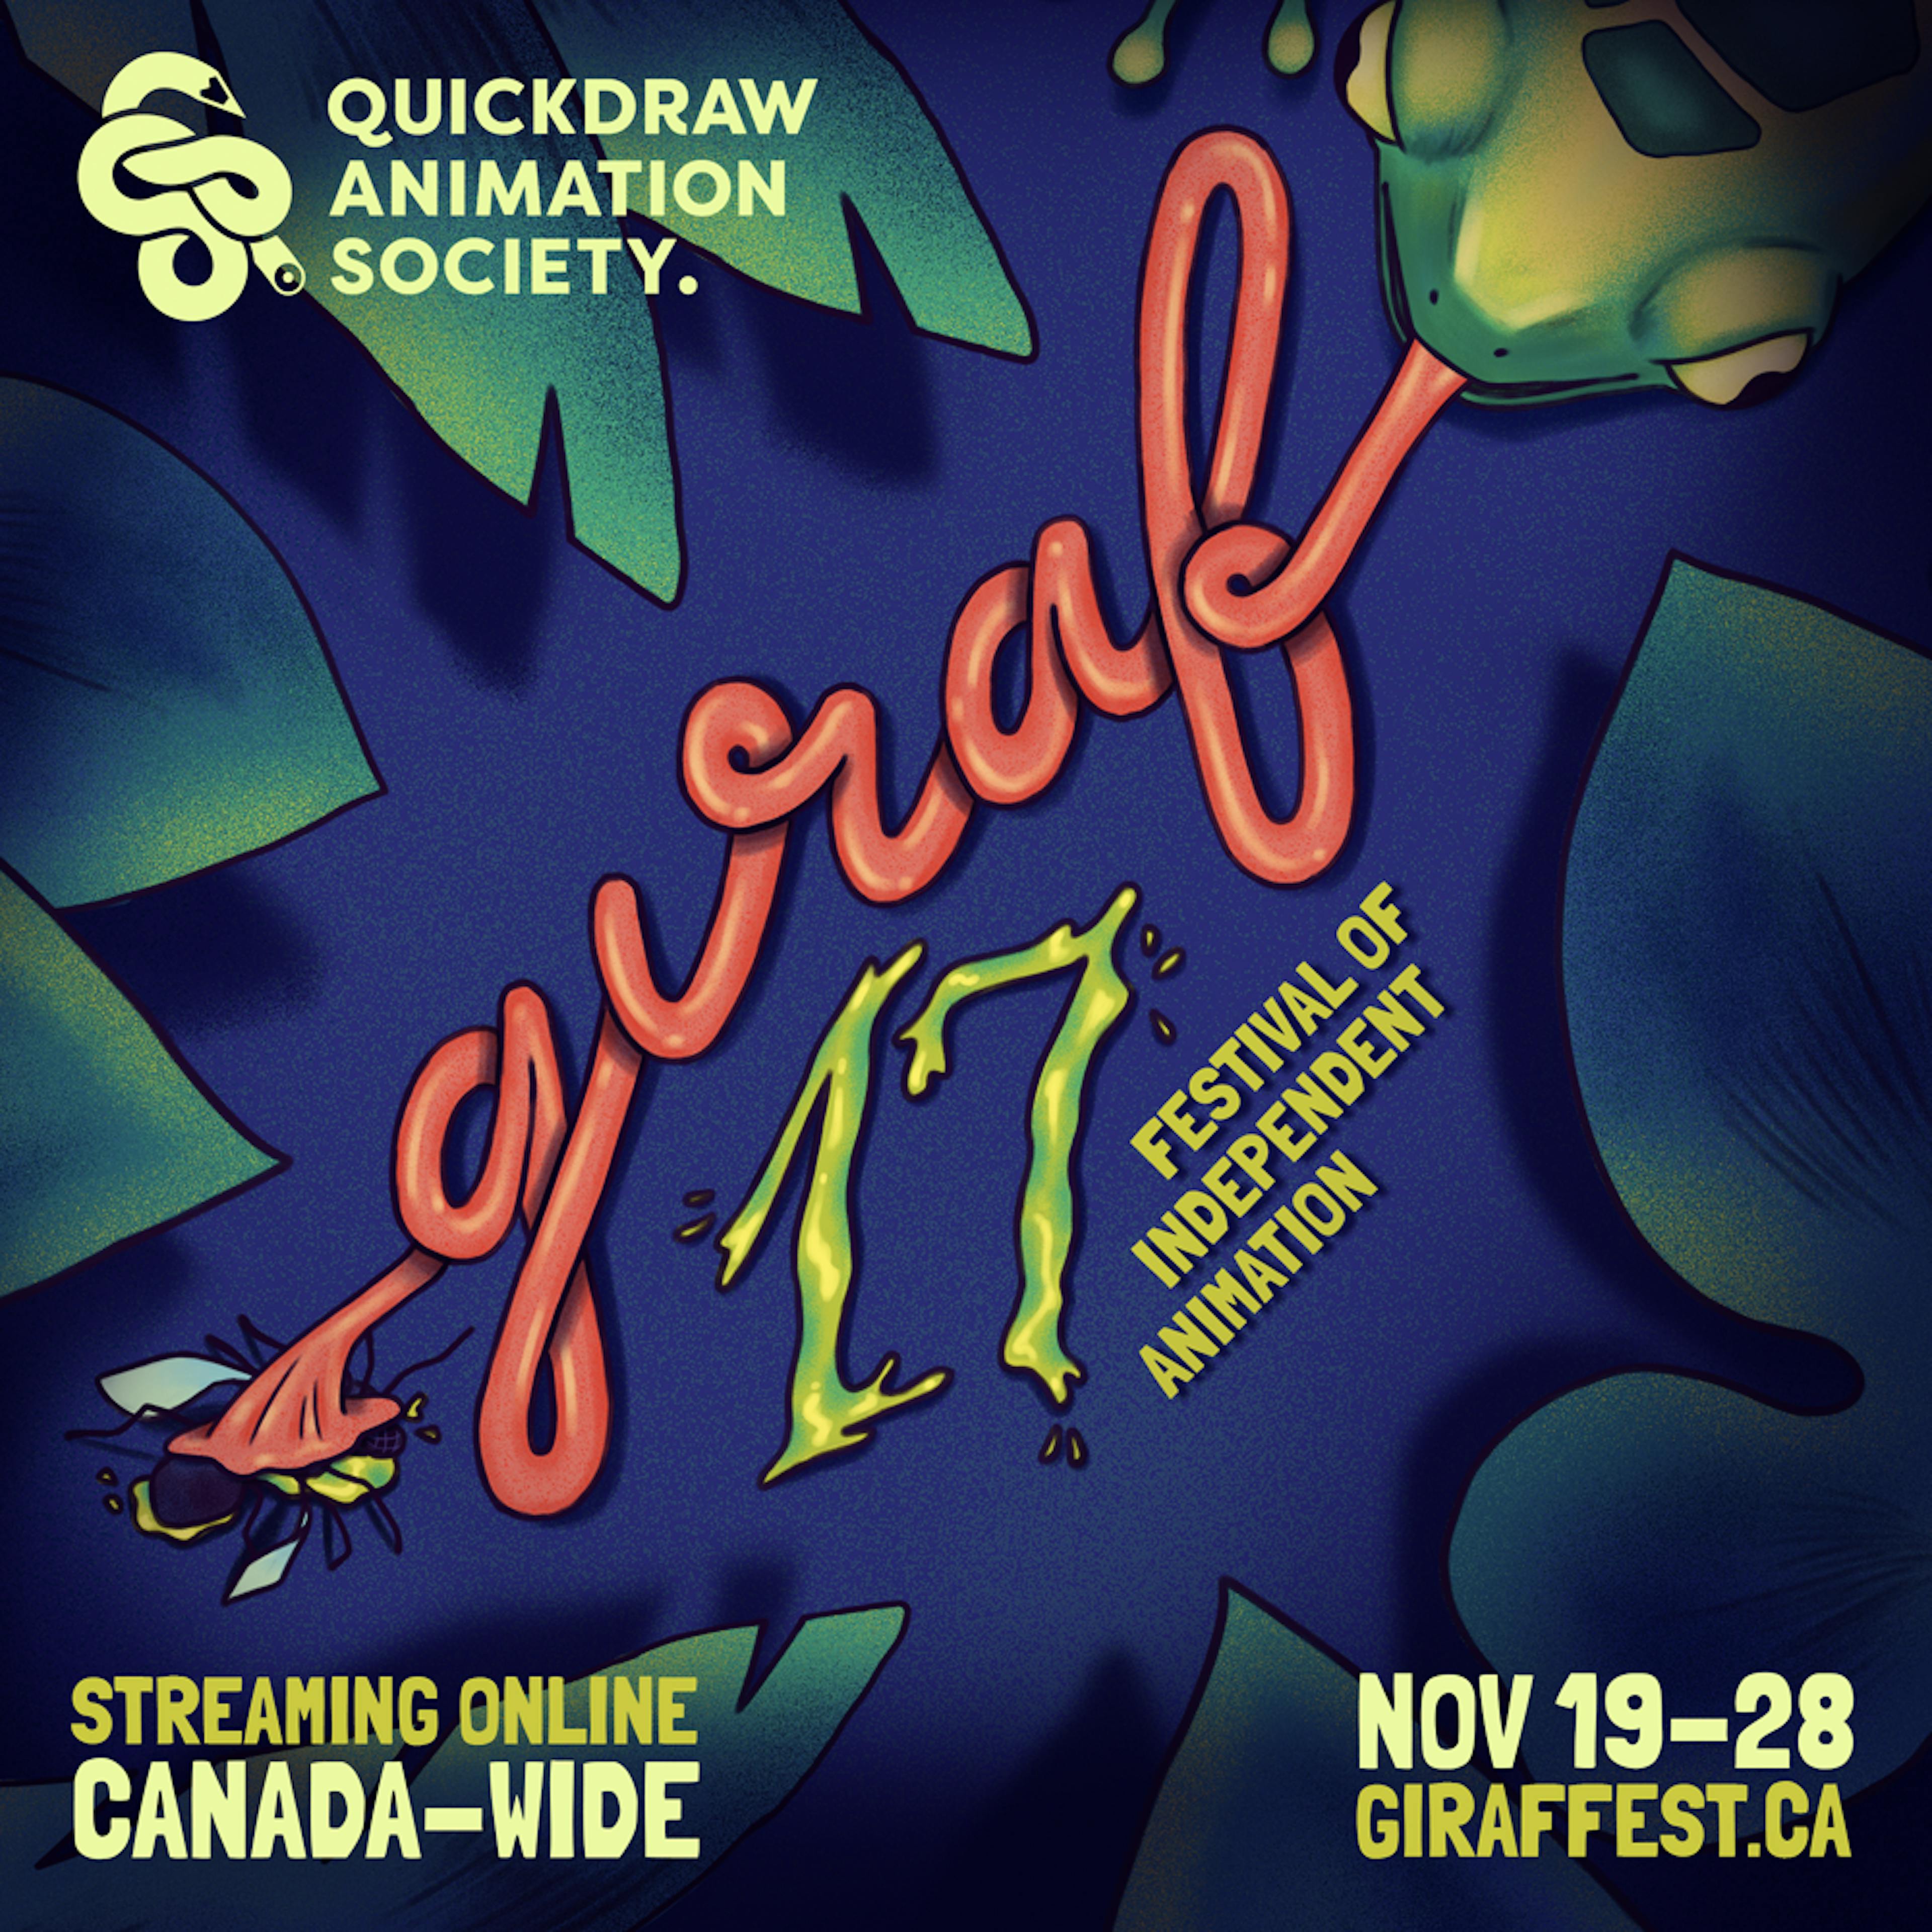 A frog with its tongue spelling "GIRAF." Full text: Quickdraw Animation Society: GIRAF 17 Festival of Independent Animation, streaming online Canada-wide, Nov. 19-28, giraffest.ca